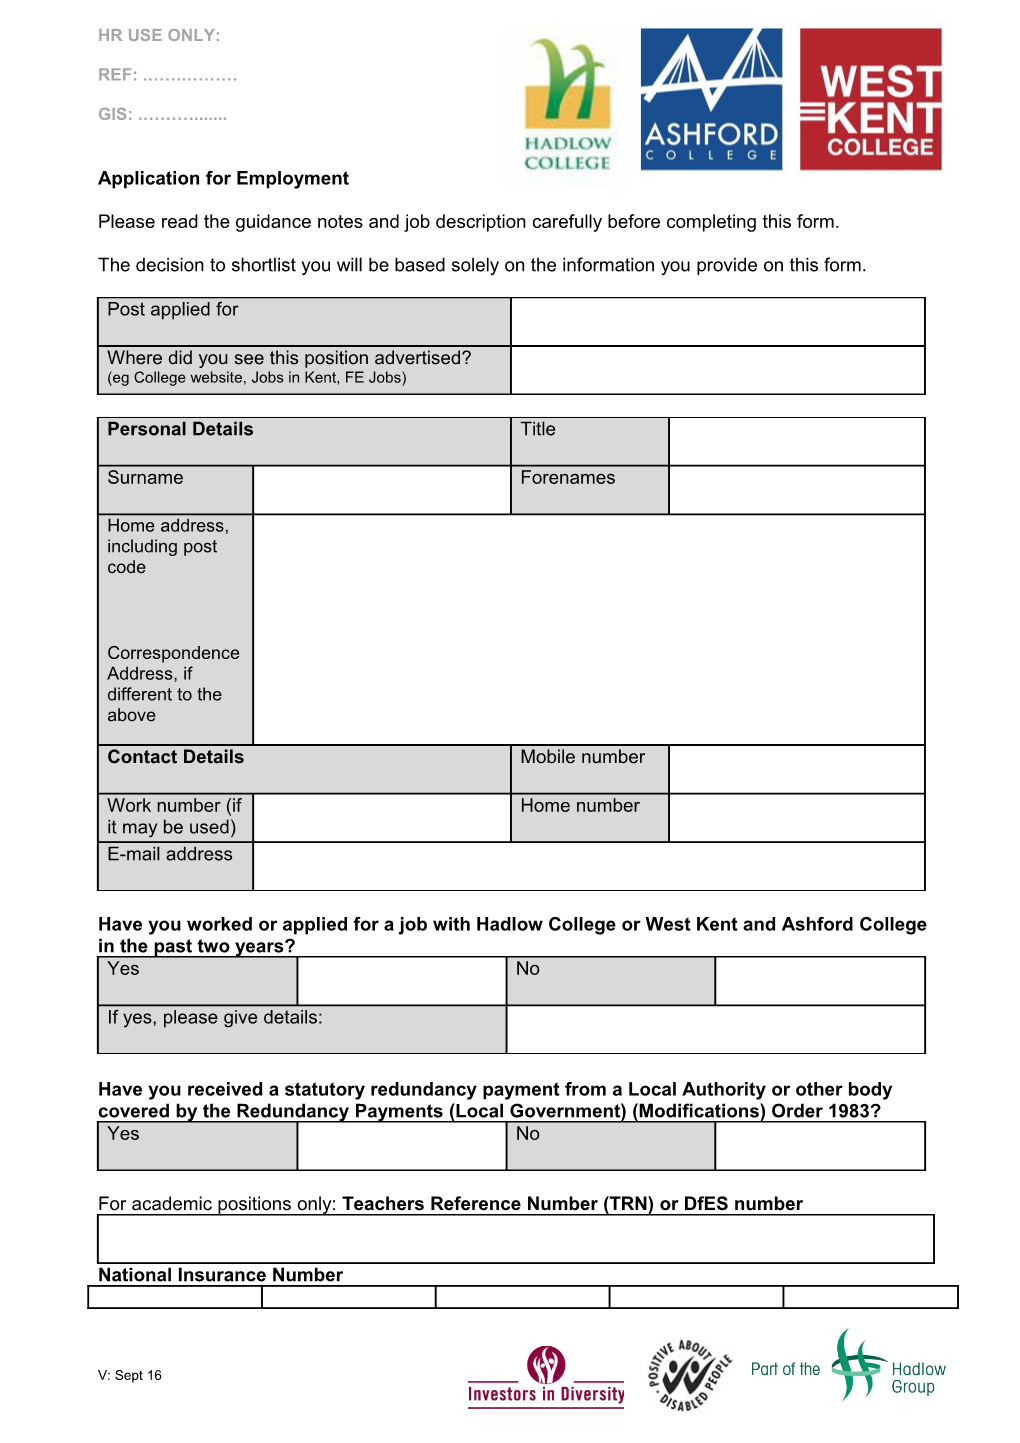 Application for Employment s27